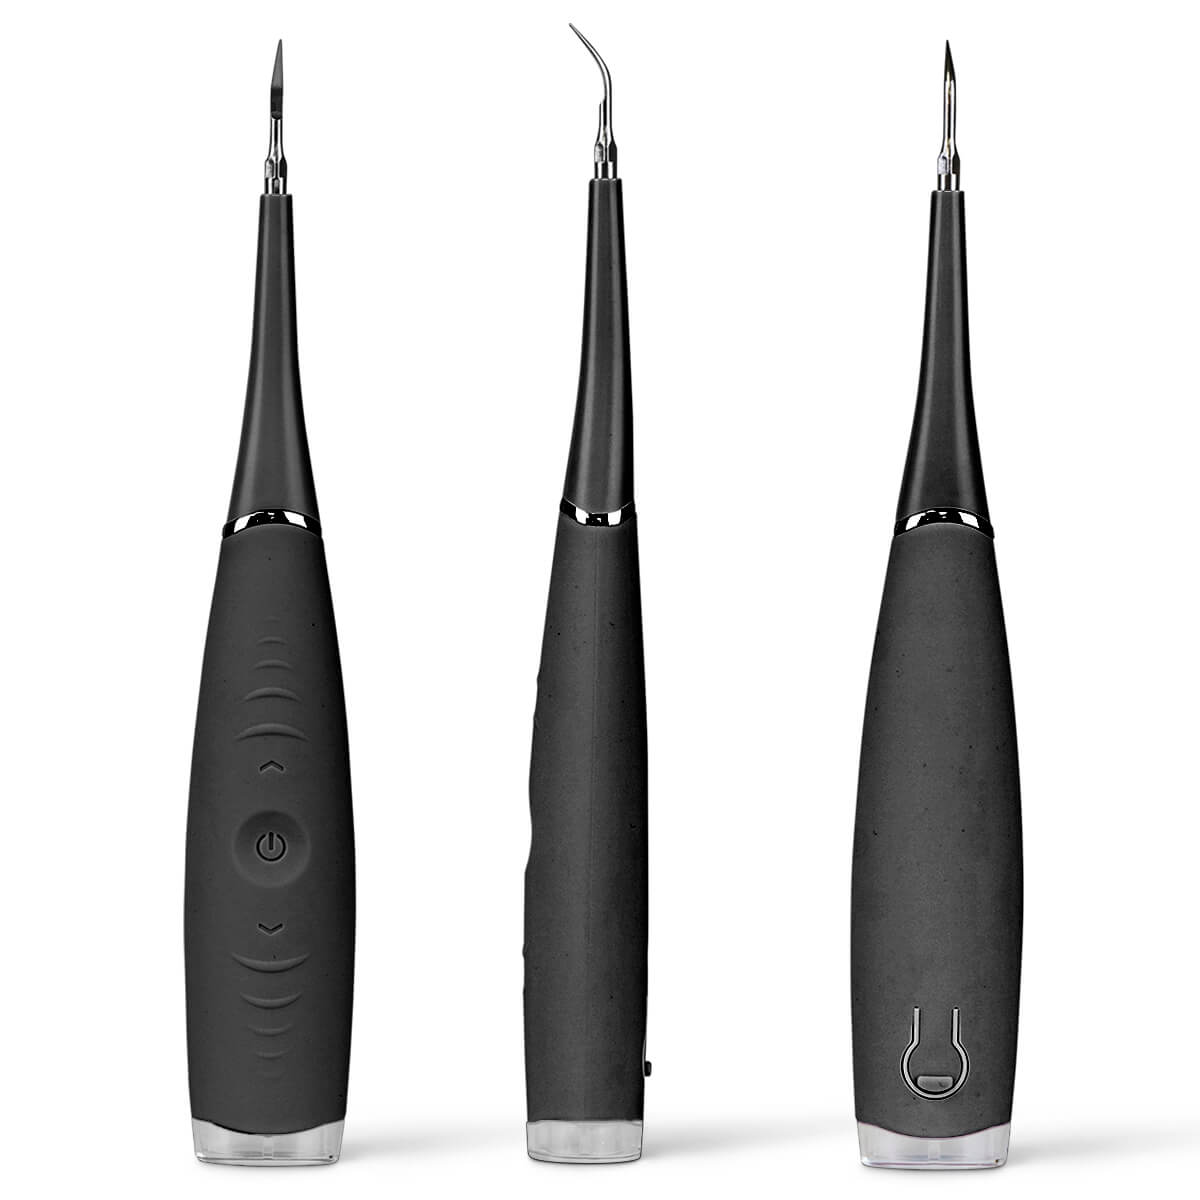 Ultrasonic Tooth Cleaner - Smile Therapy